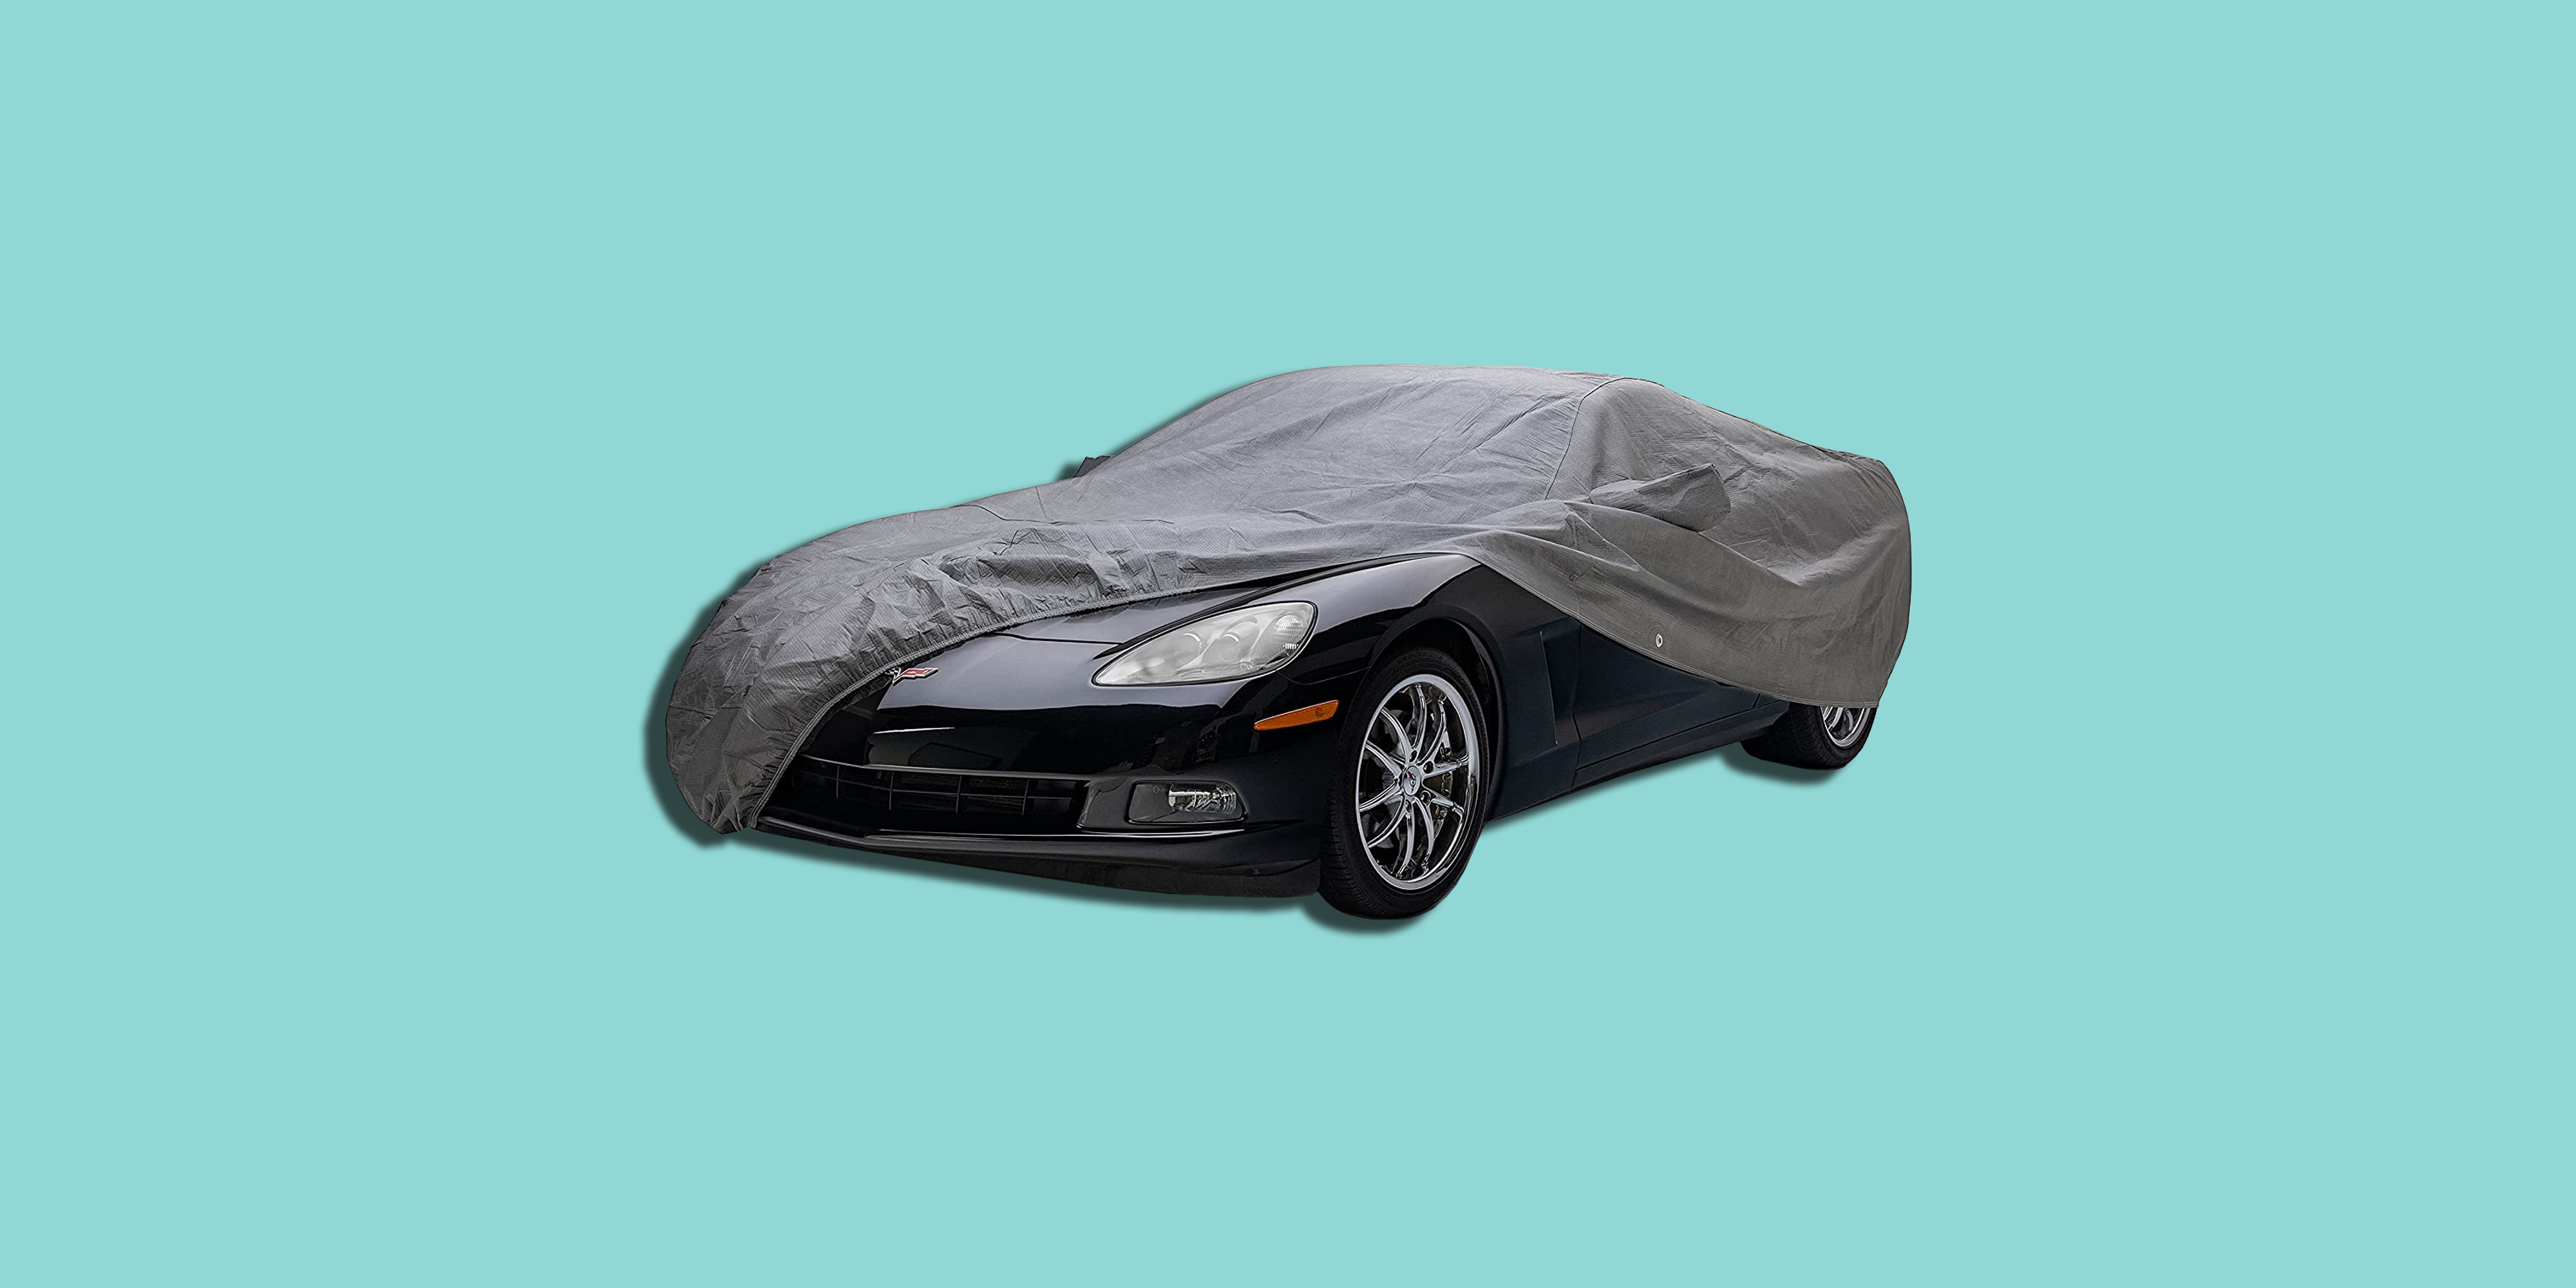 Weatherproof Car Cover Compatible with 2021 Audi A4 Sedan Comparable to 